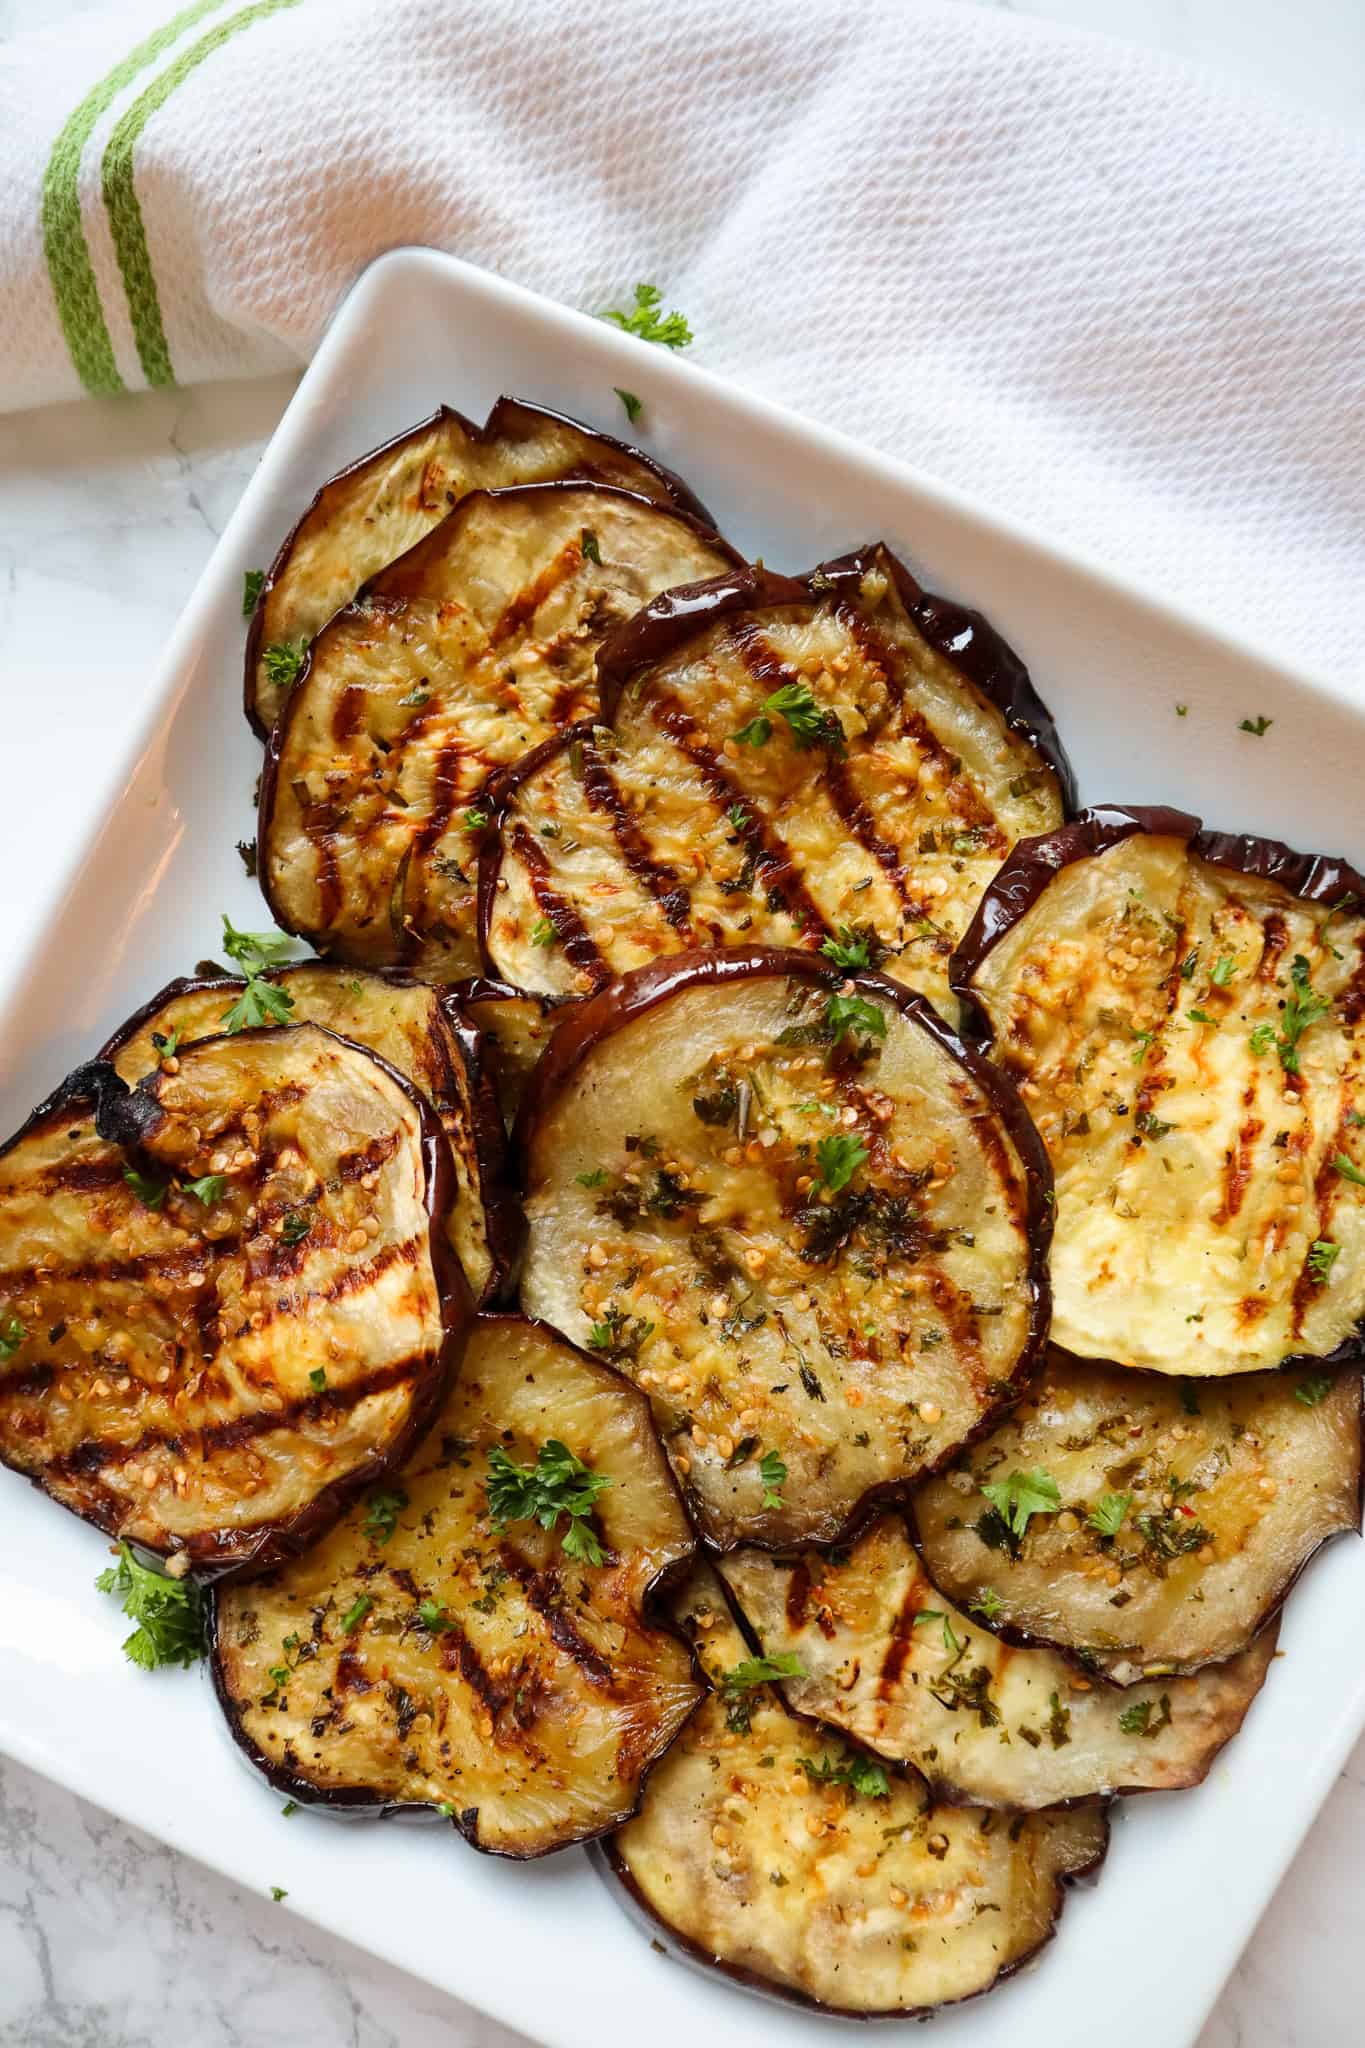 Grilled Eggplant With Garlic and Herbs